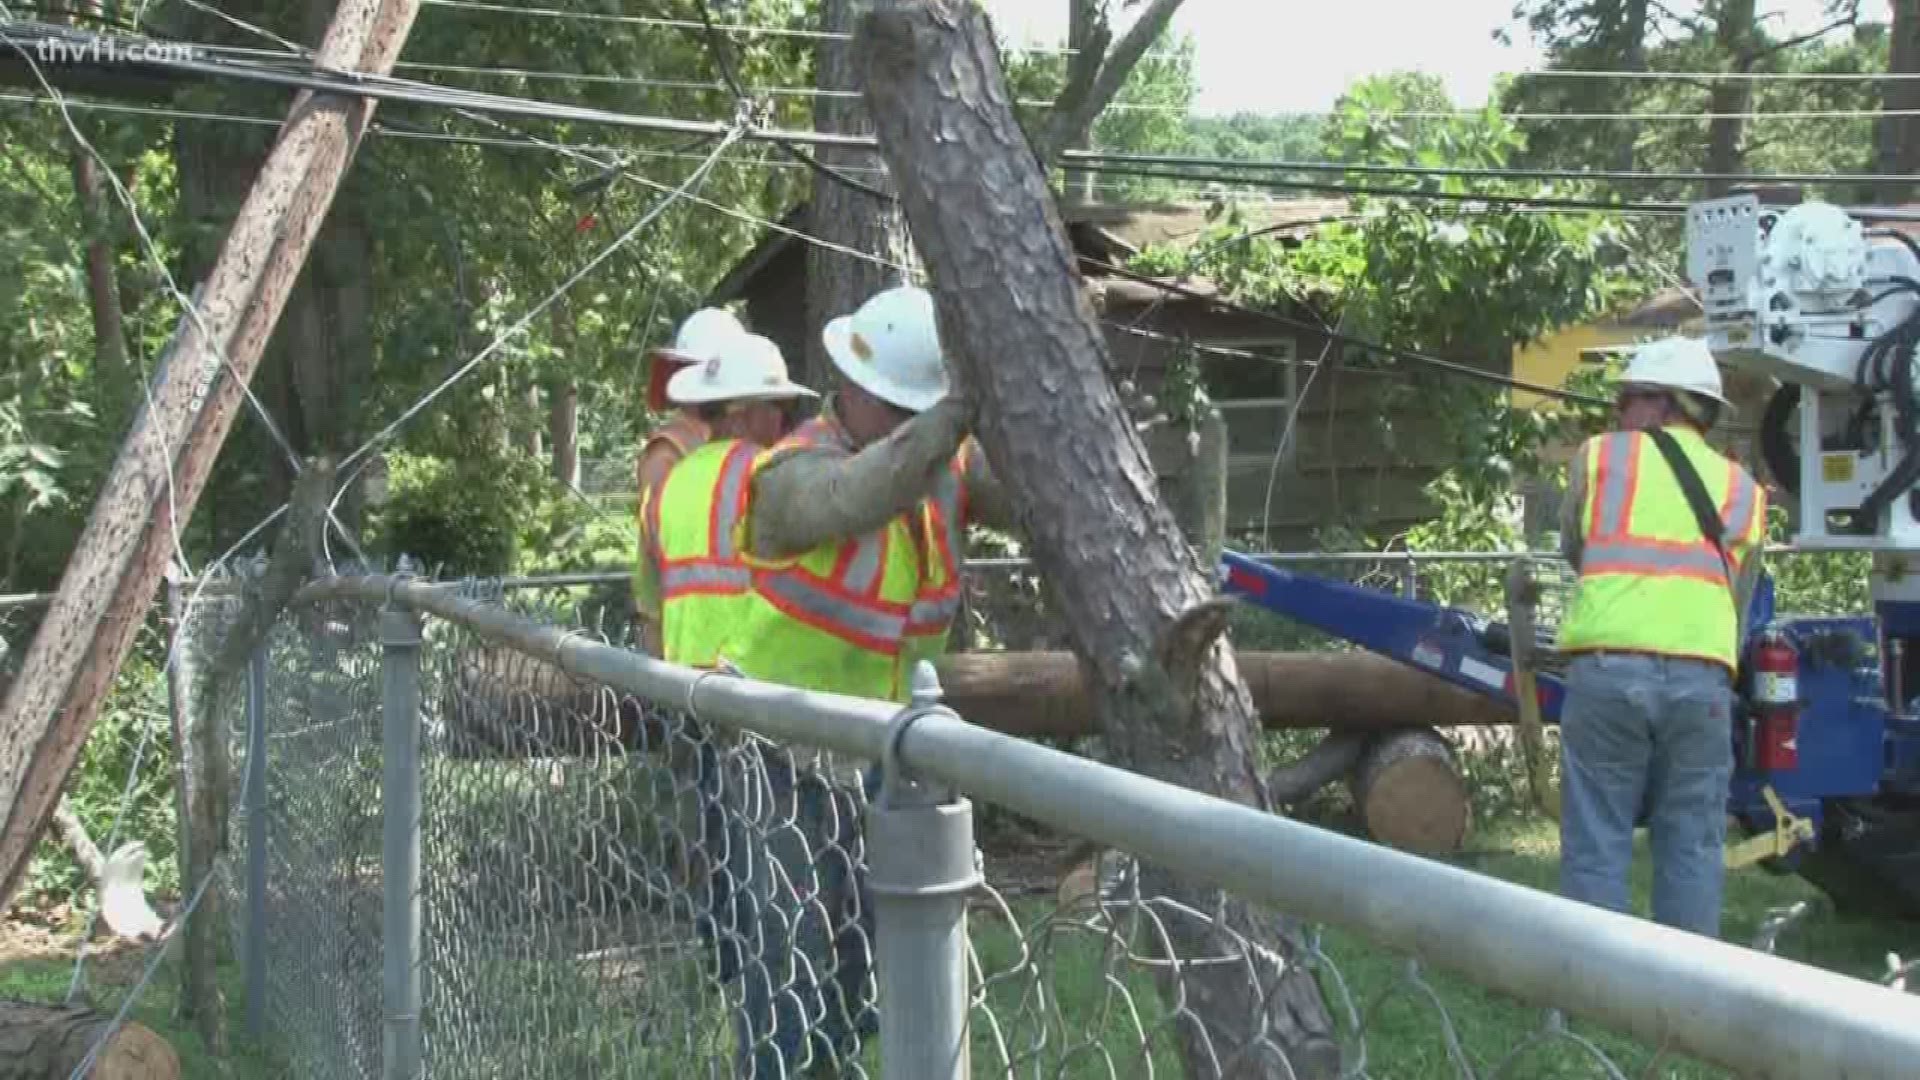 Entergy said its crews are working as fast as they safely can.